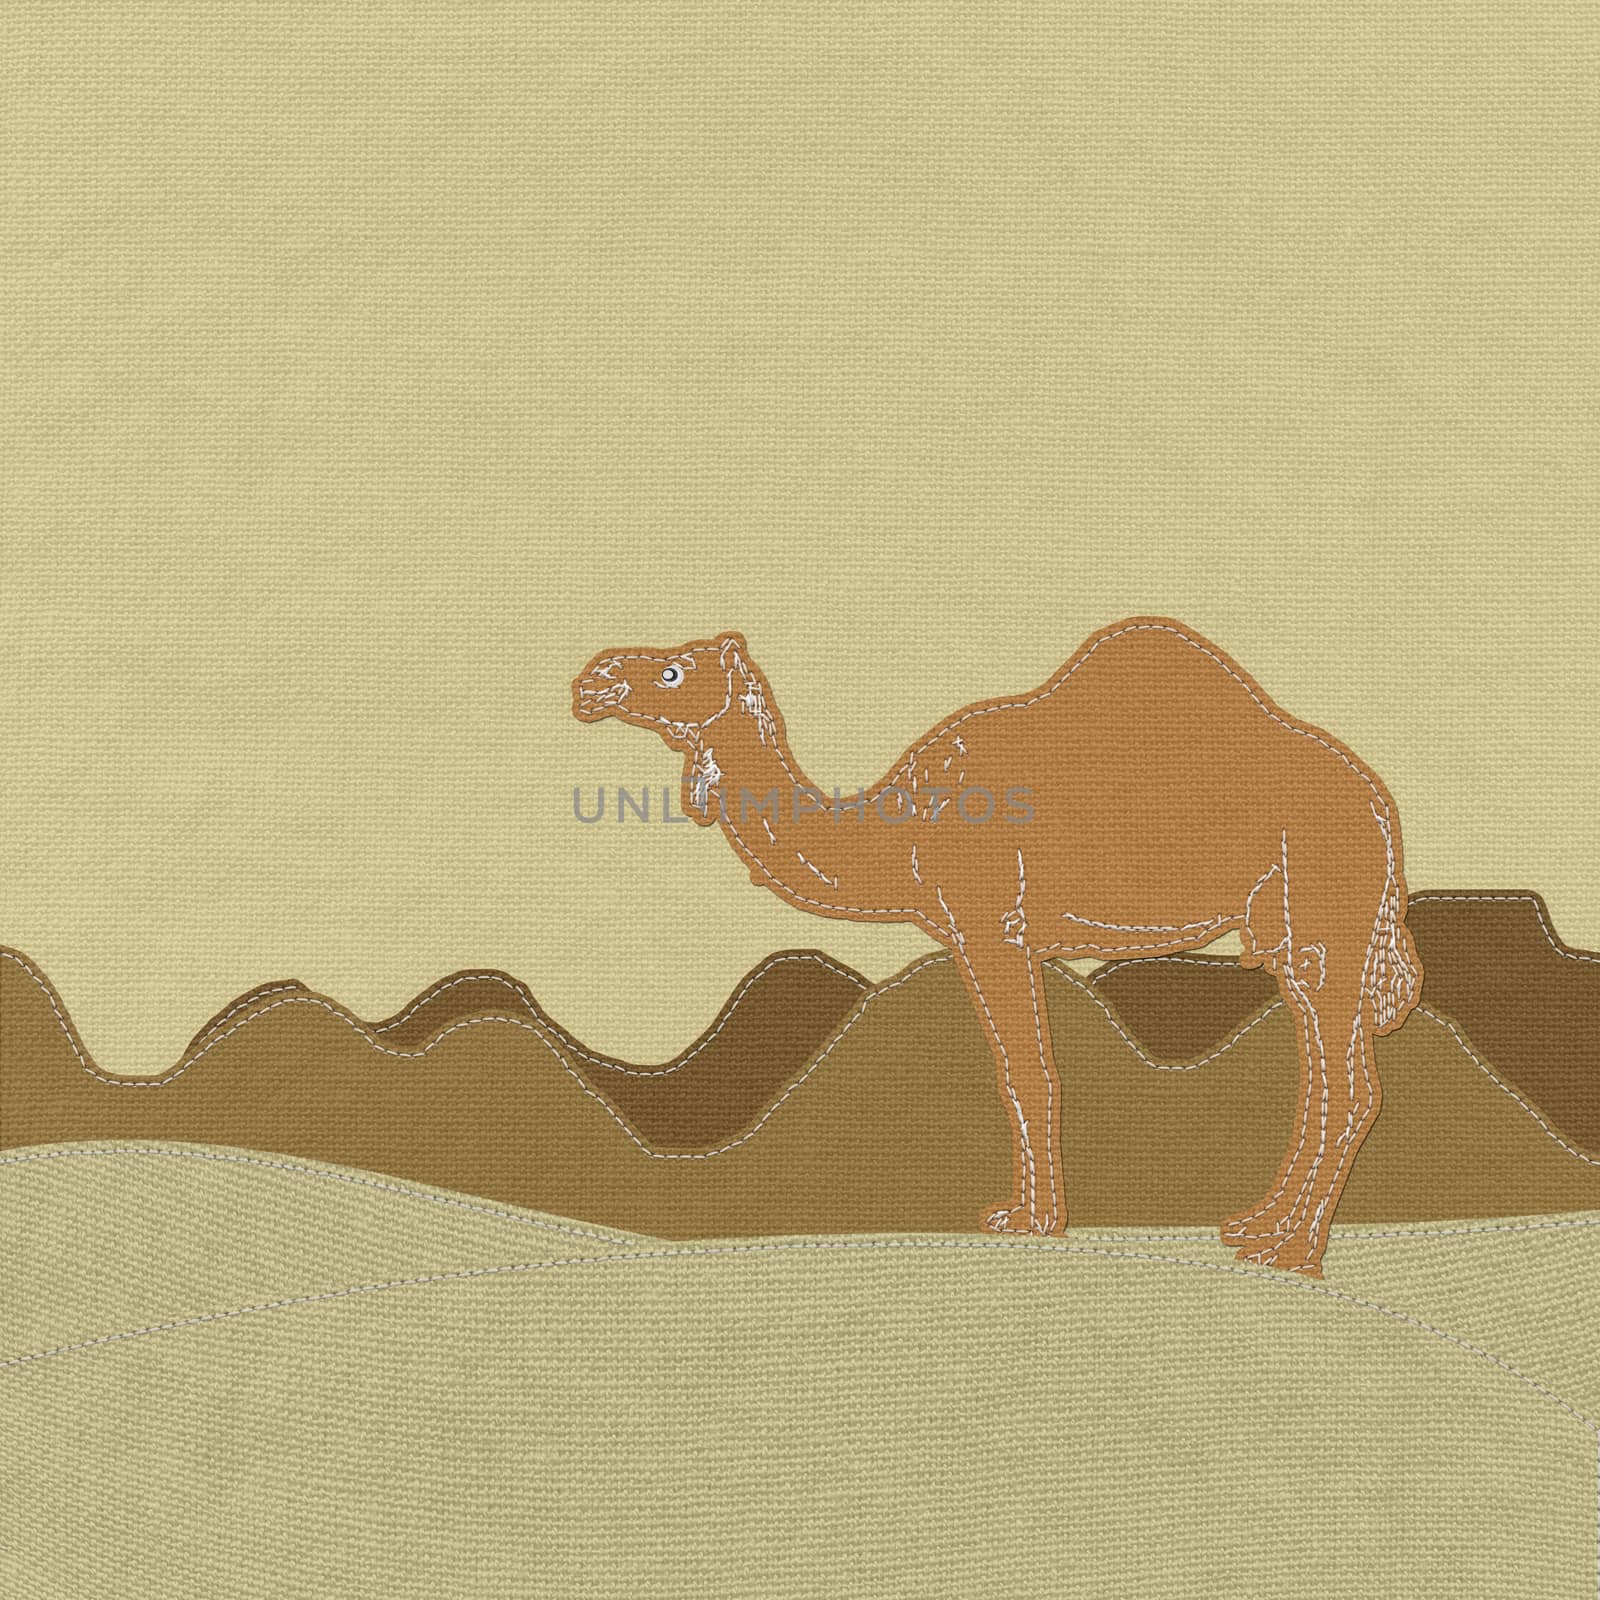 Lone Camel in the Desert sand with stitch style on fabric backgr by basketman23